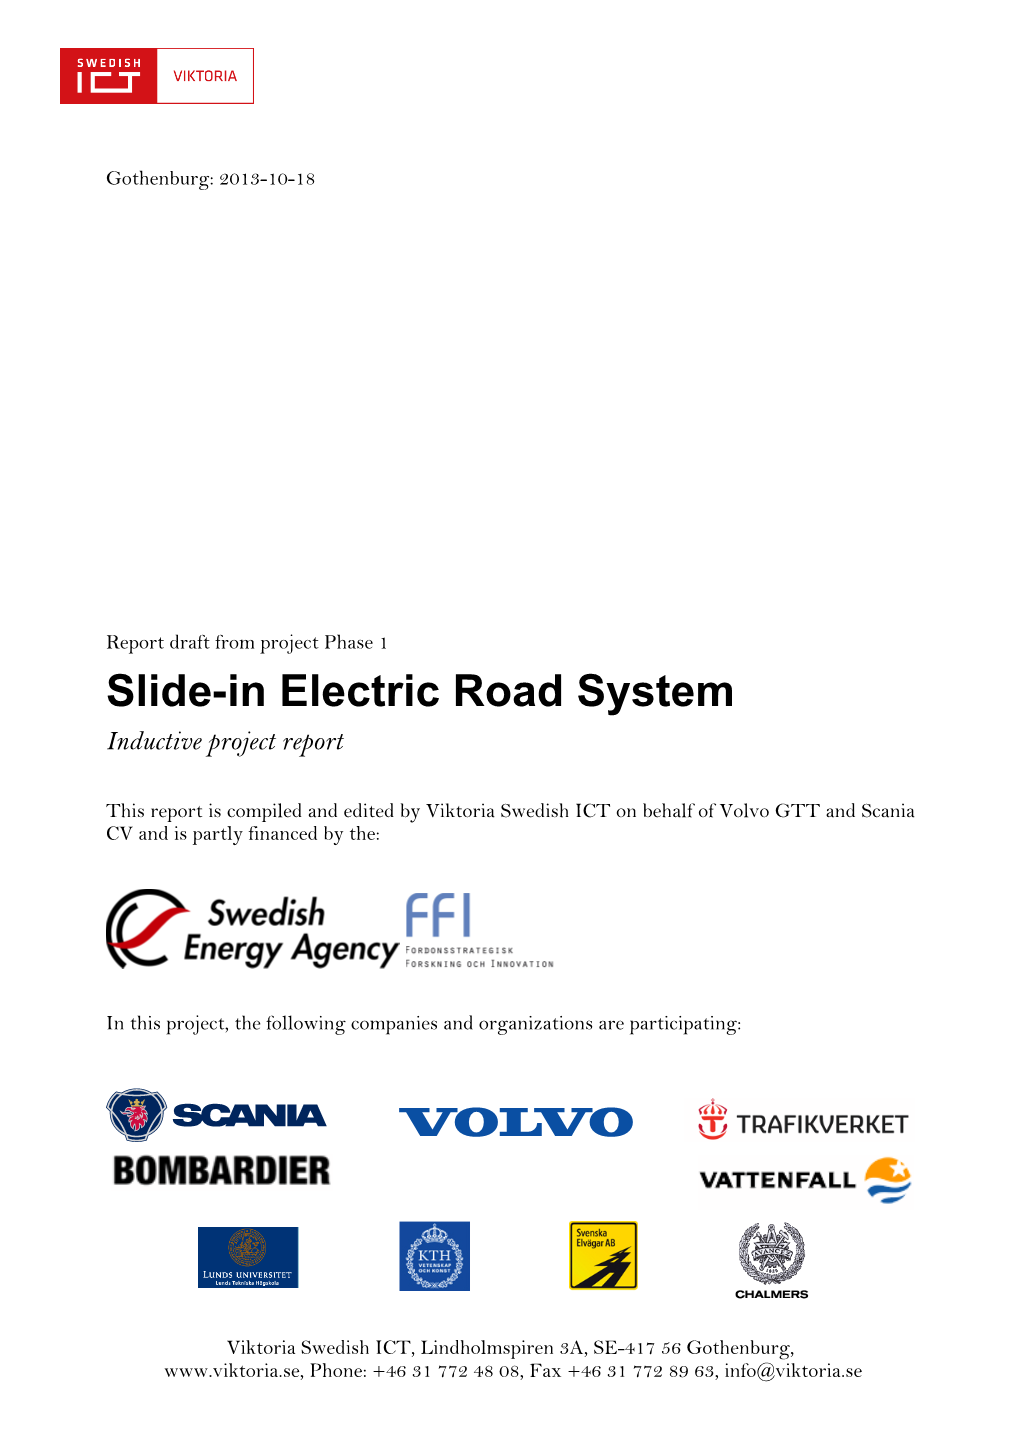 Slide-In Electric Road System Inductive Project Report